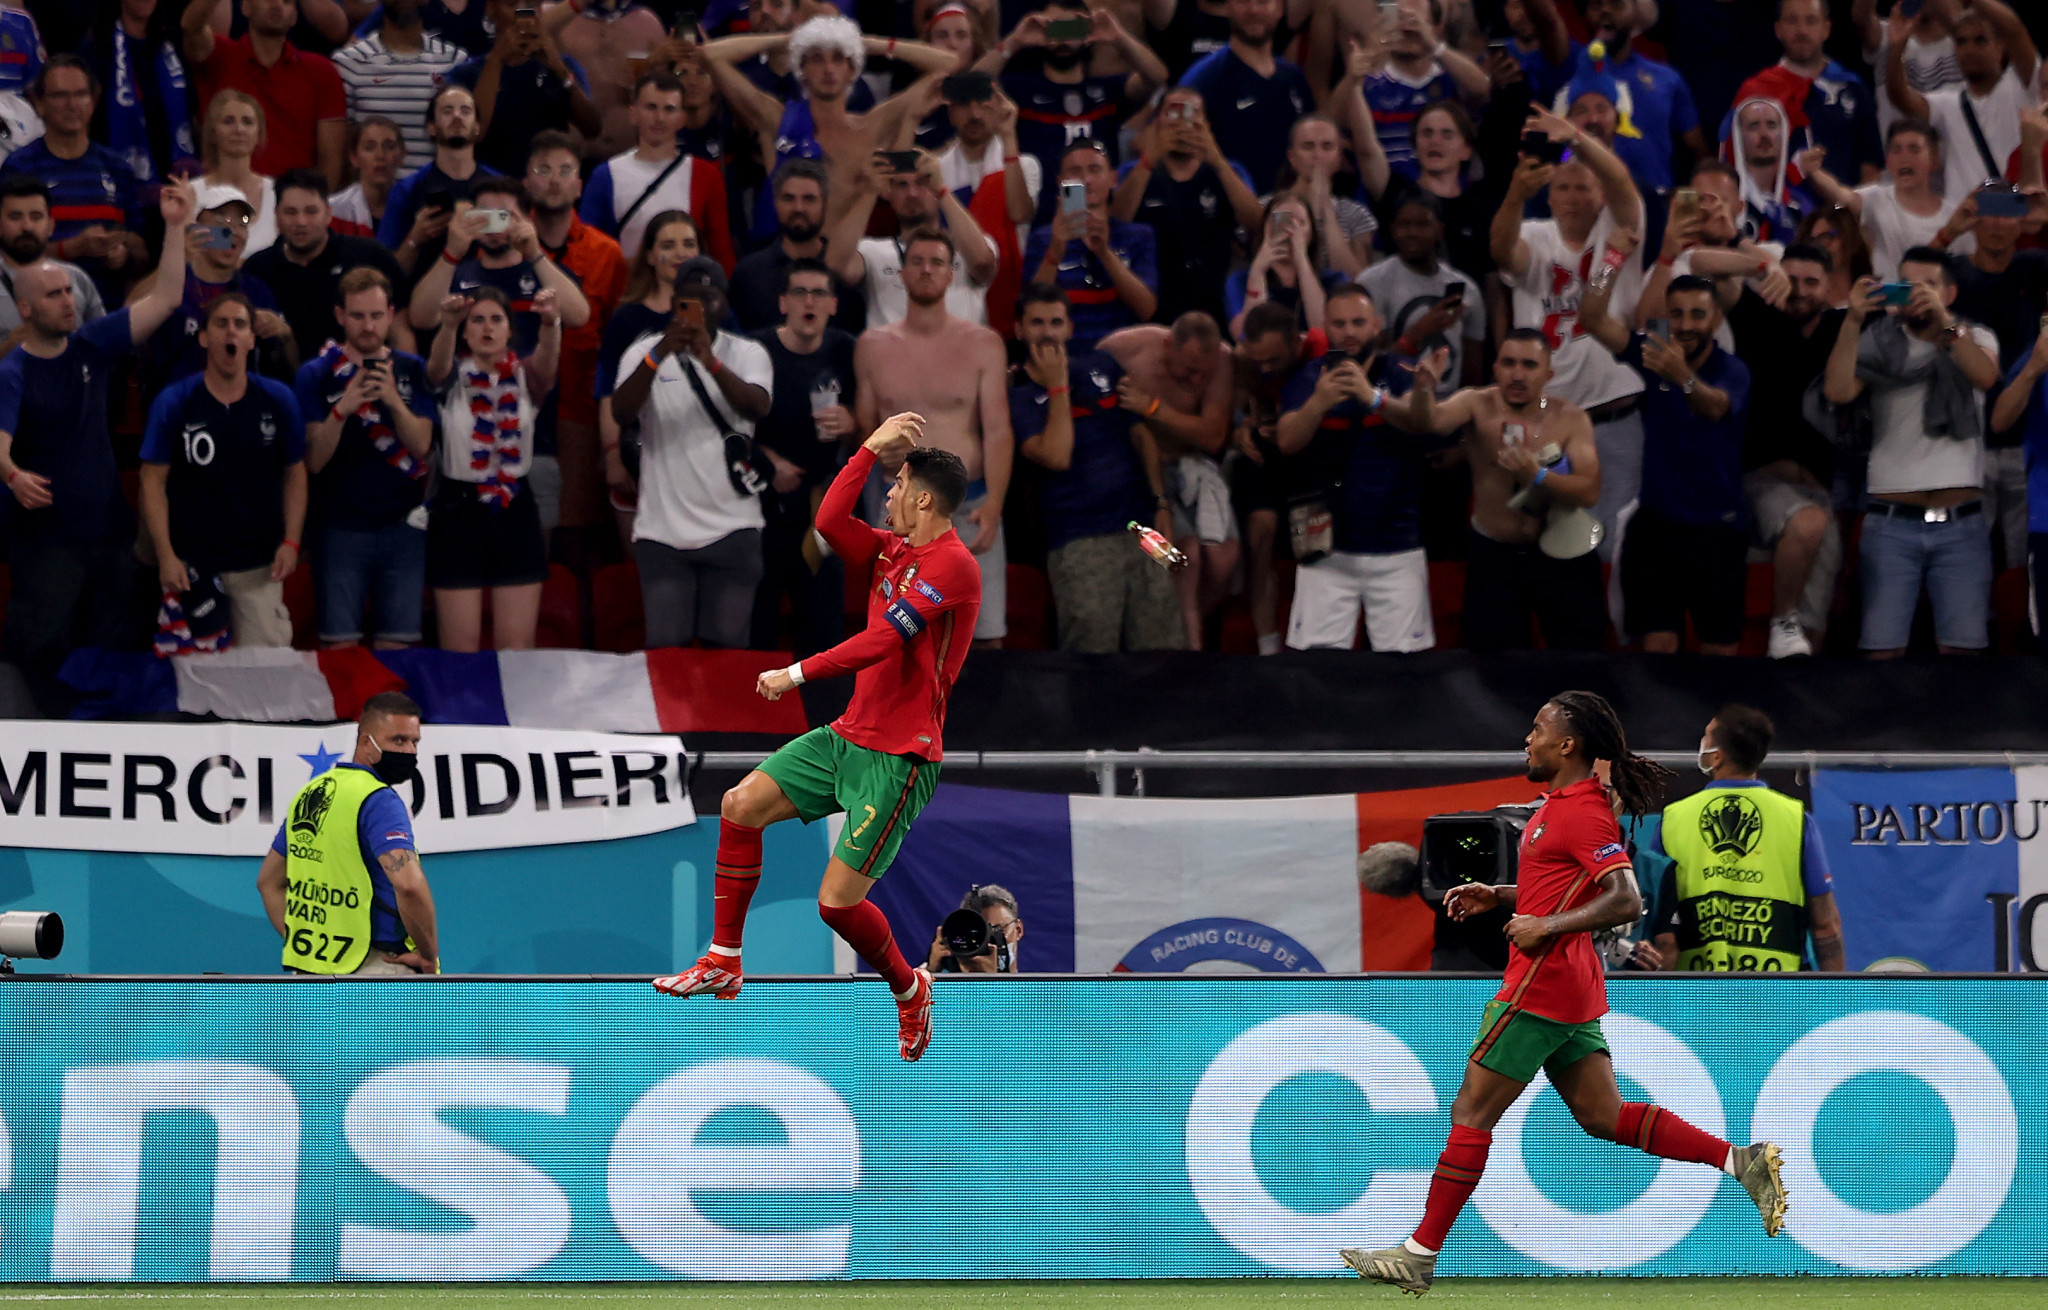 Cristiano Ronaldo celebrates equalling the international goalscoring record during Portugal's draw with Hungary ©Getty Images